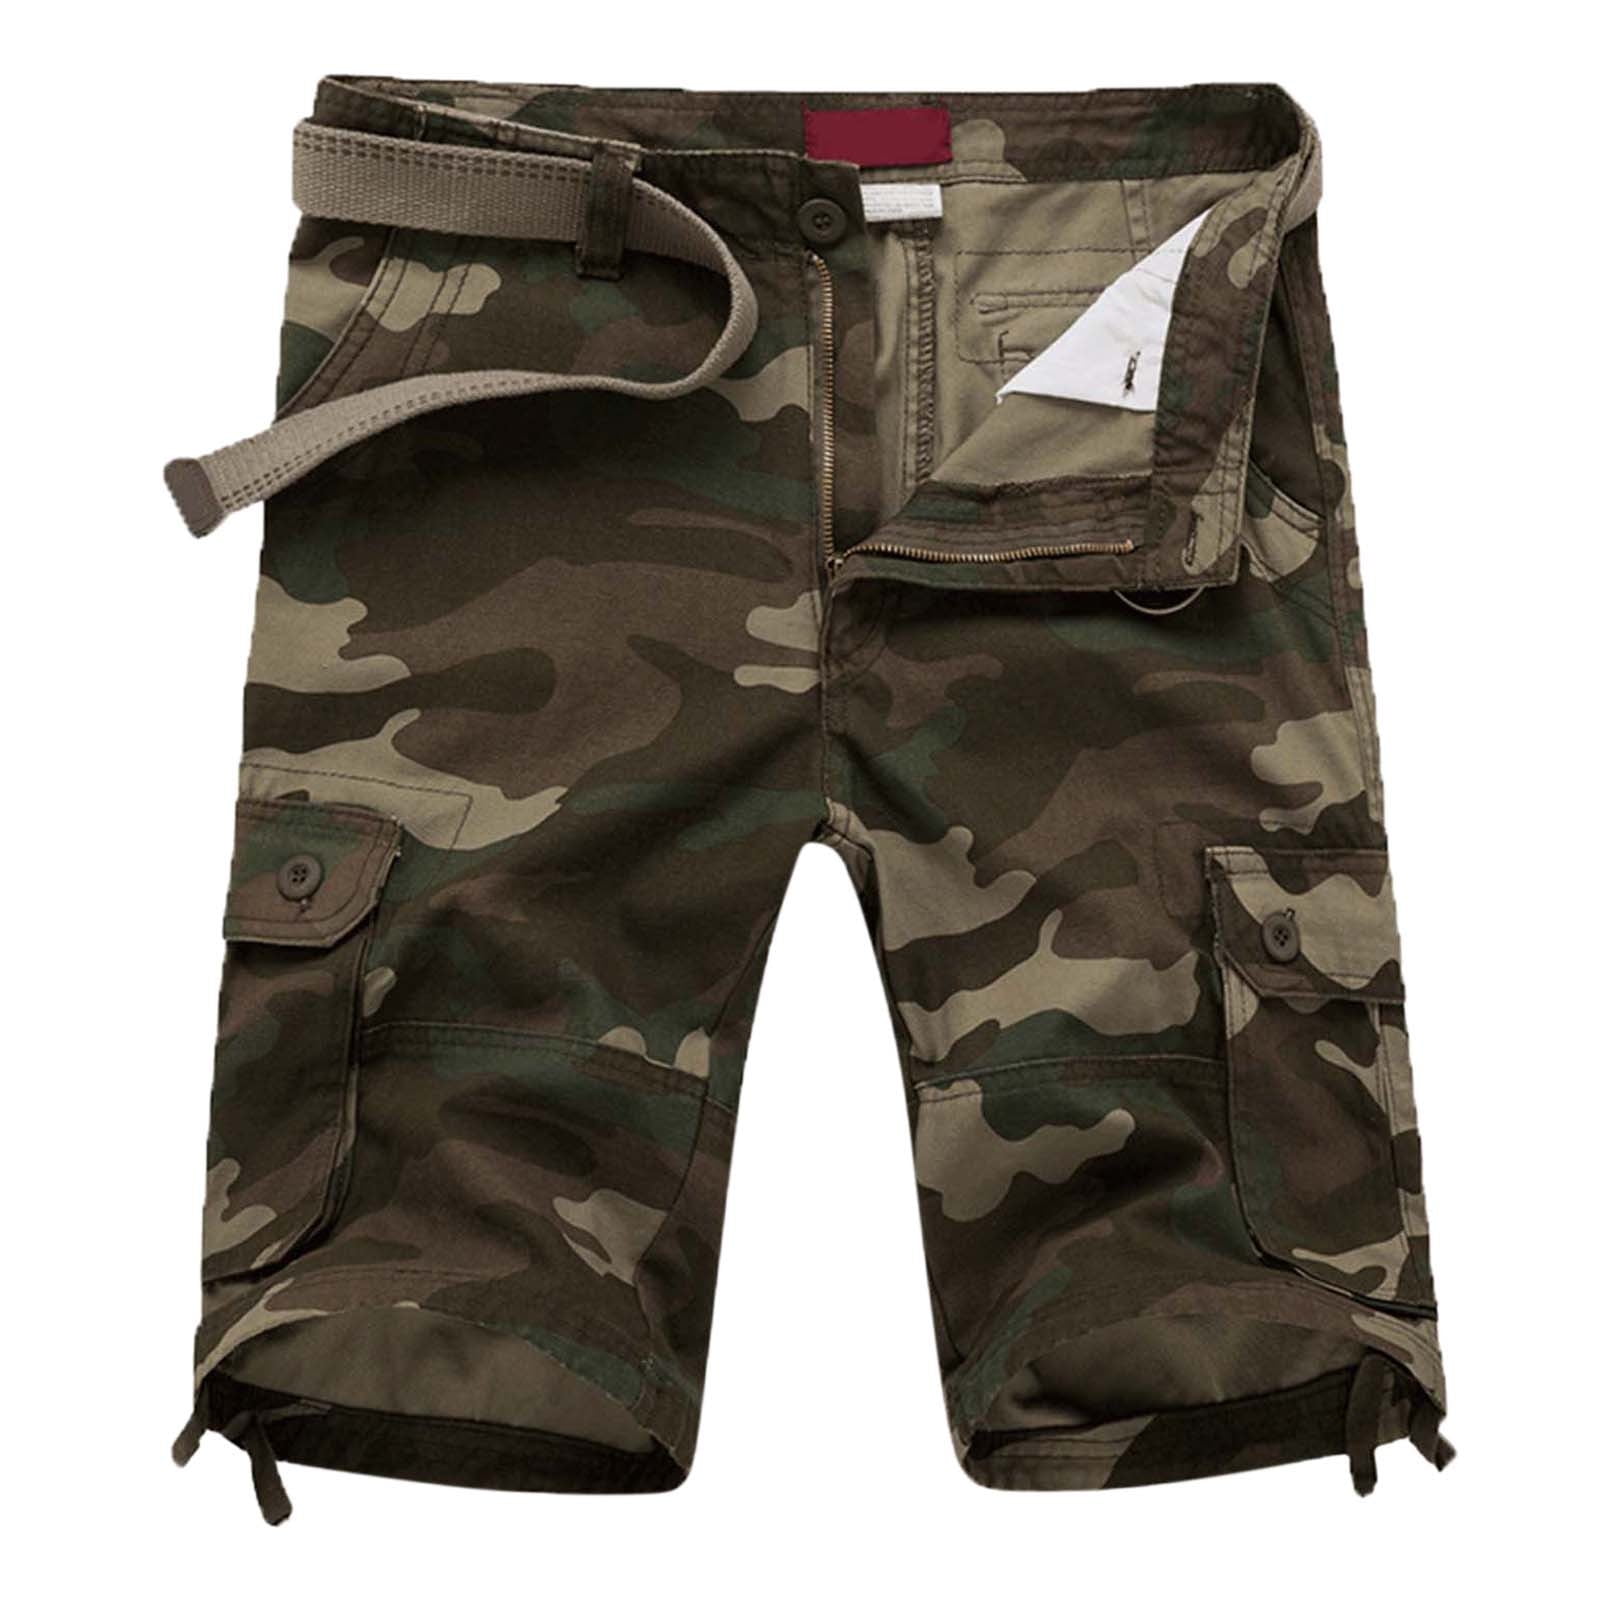 wendunide cargo shorts for men Male Fashion Casual Plaid Camouflage ...